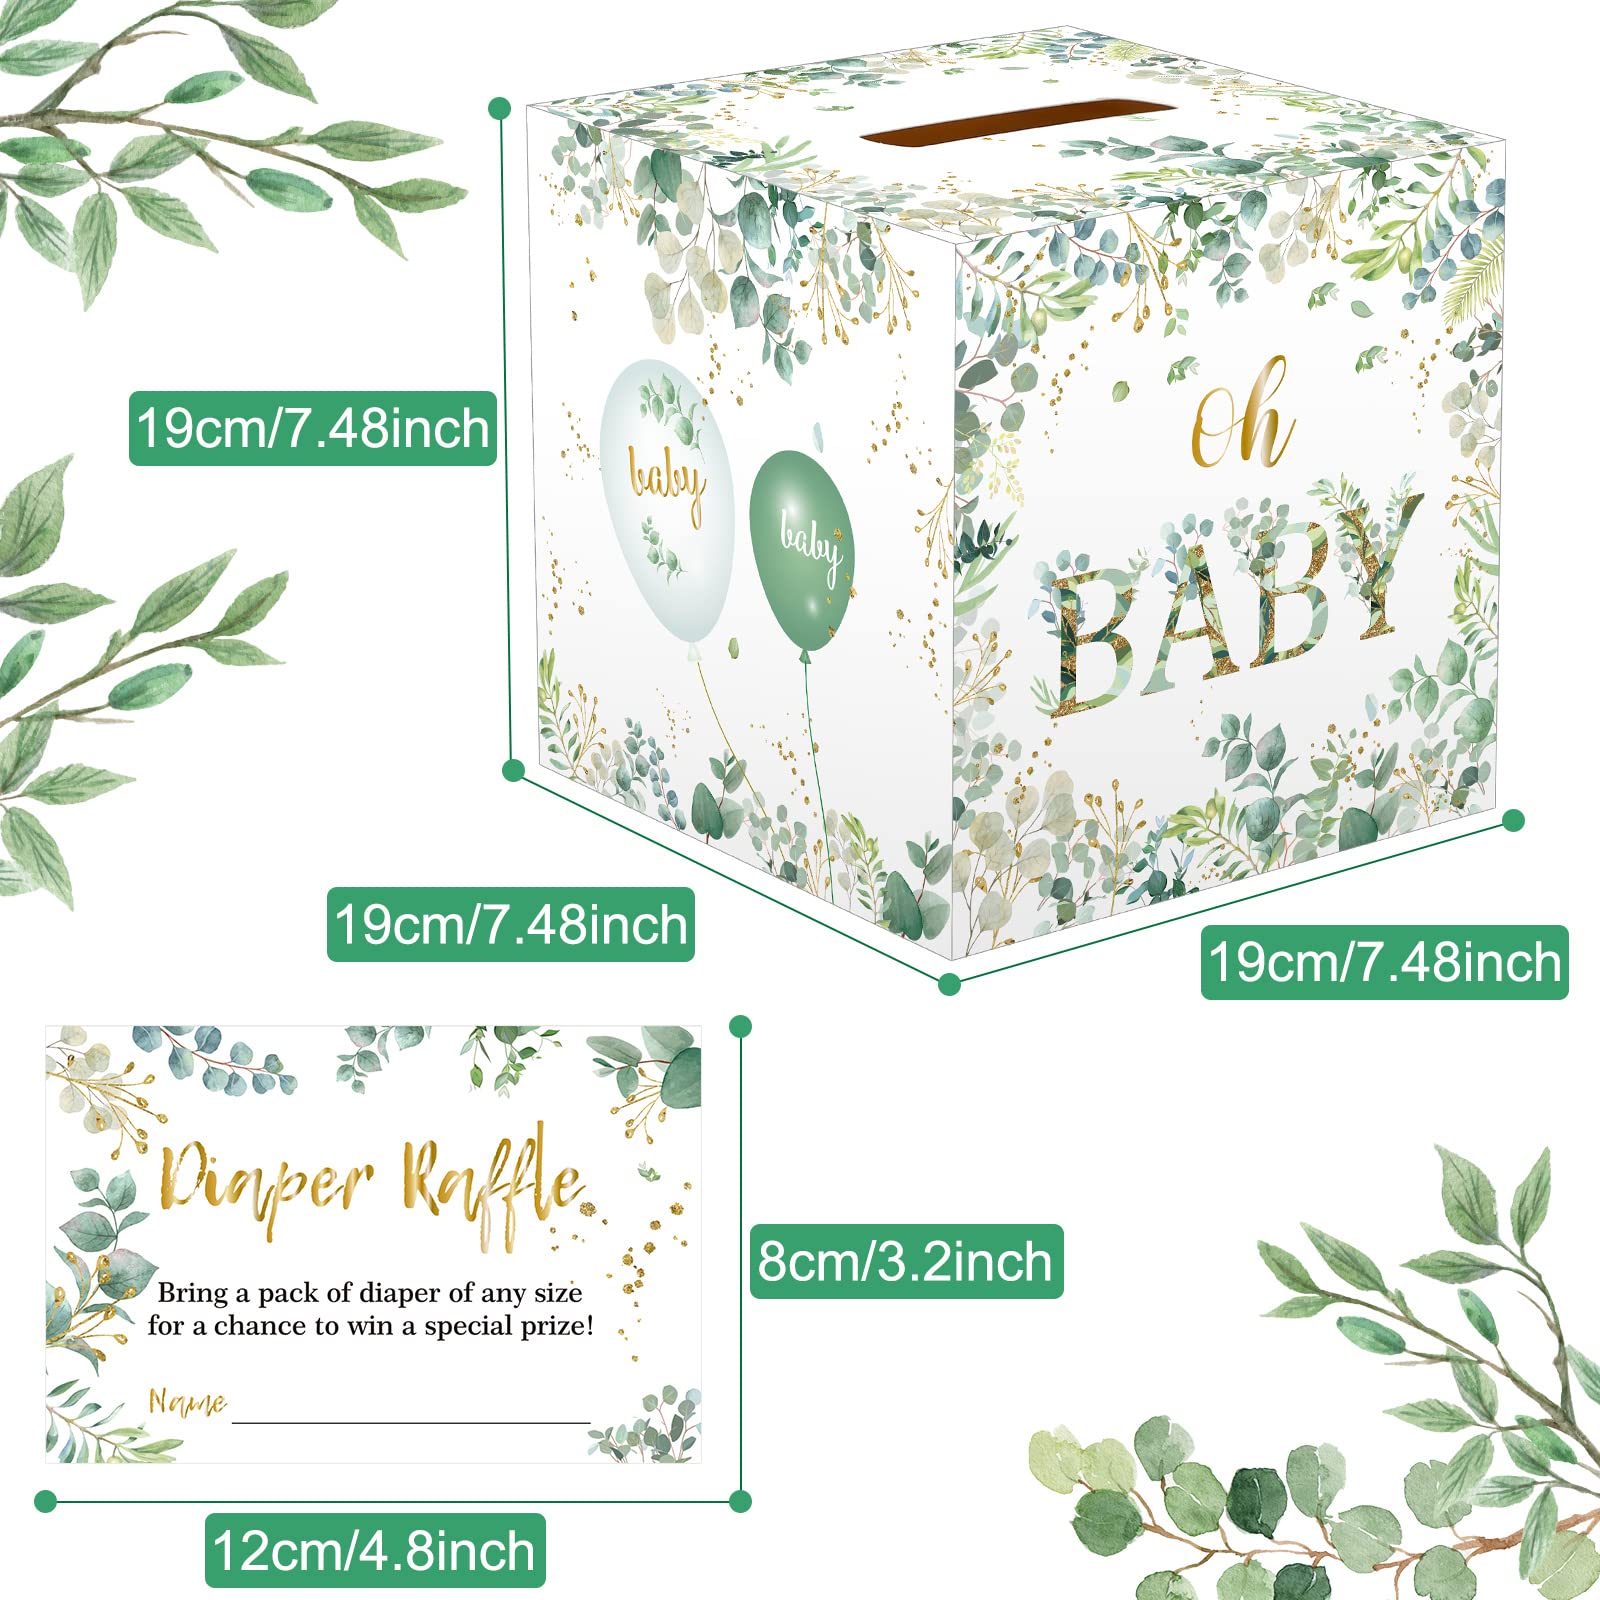 50 Pieces Greenery Diaper Raffle Tickets with Baby Shower Holder Box Baby Party Decorations Favors Sign Box Insert Ticket Diaper Raffle Game Kit